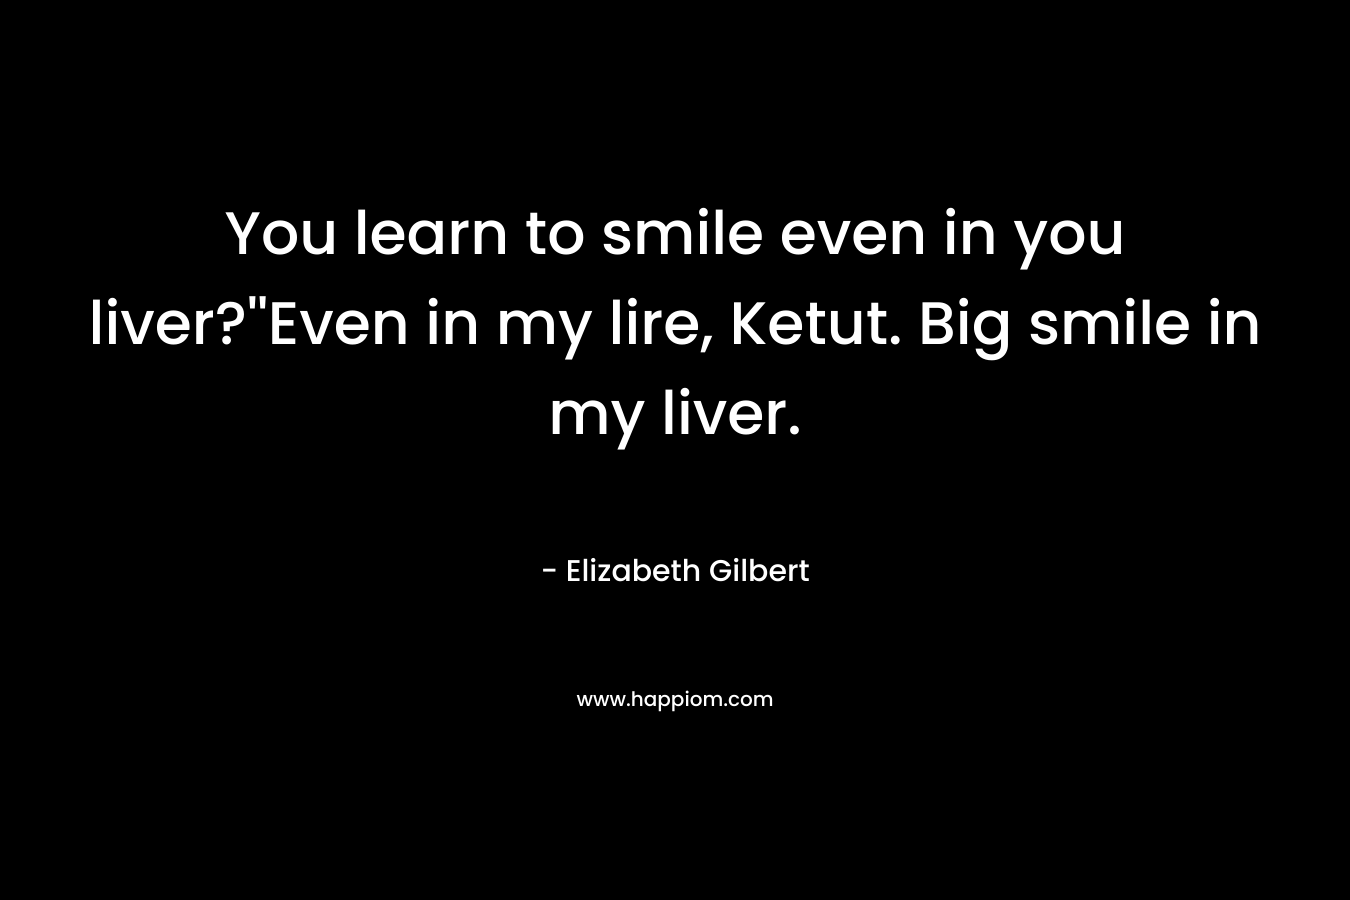 You learn to smile even in you liver?''Even in my lire, Ketut. Big smile in my liver.